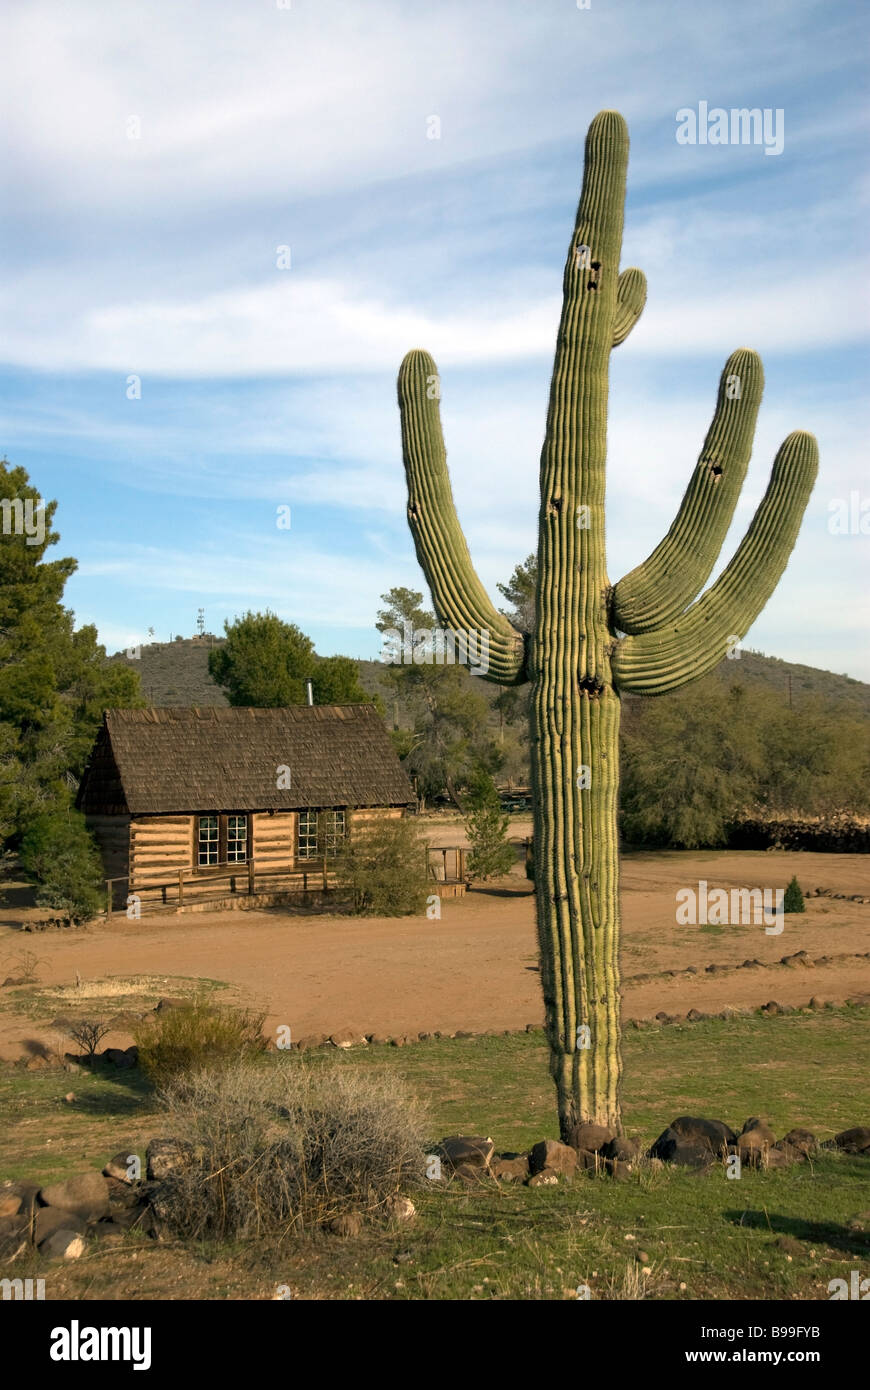 Stock photo of Pioneer Living History Village with saguaro cactus in foreground Stock Photo